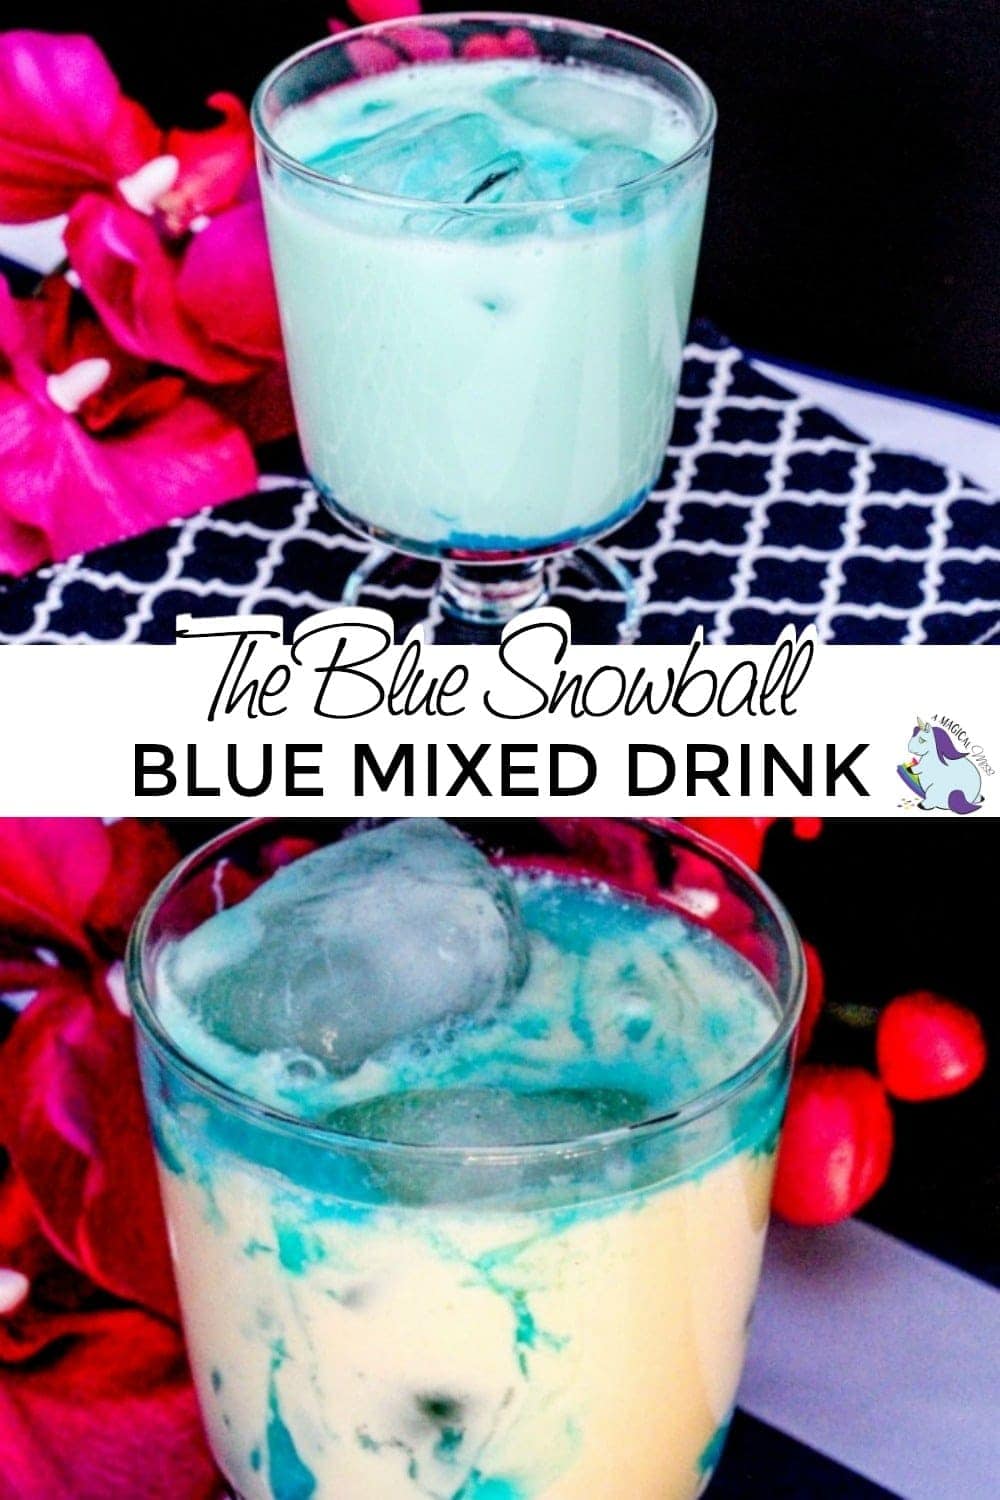 Blue mixed drink collage of the drink stirred and left swirled